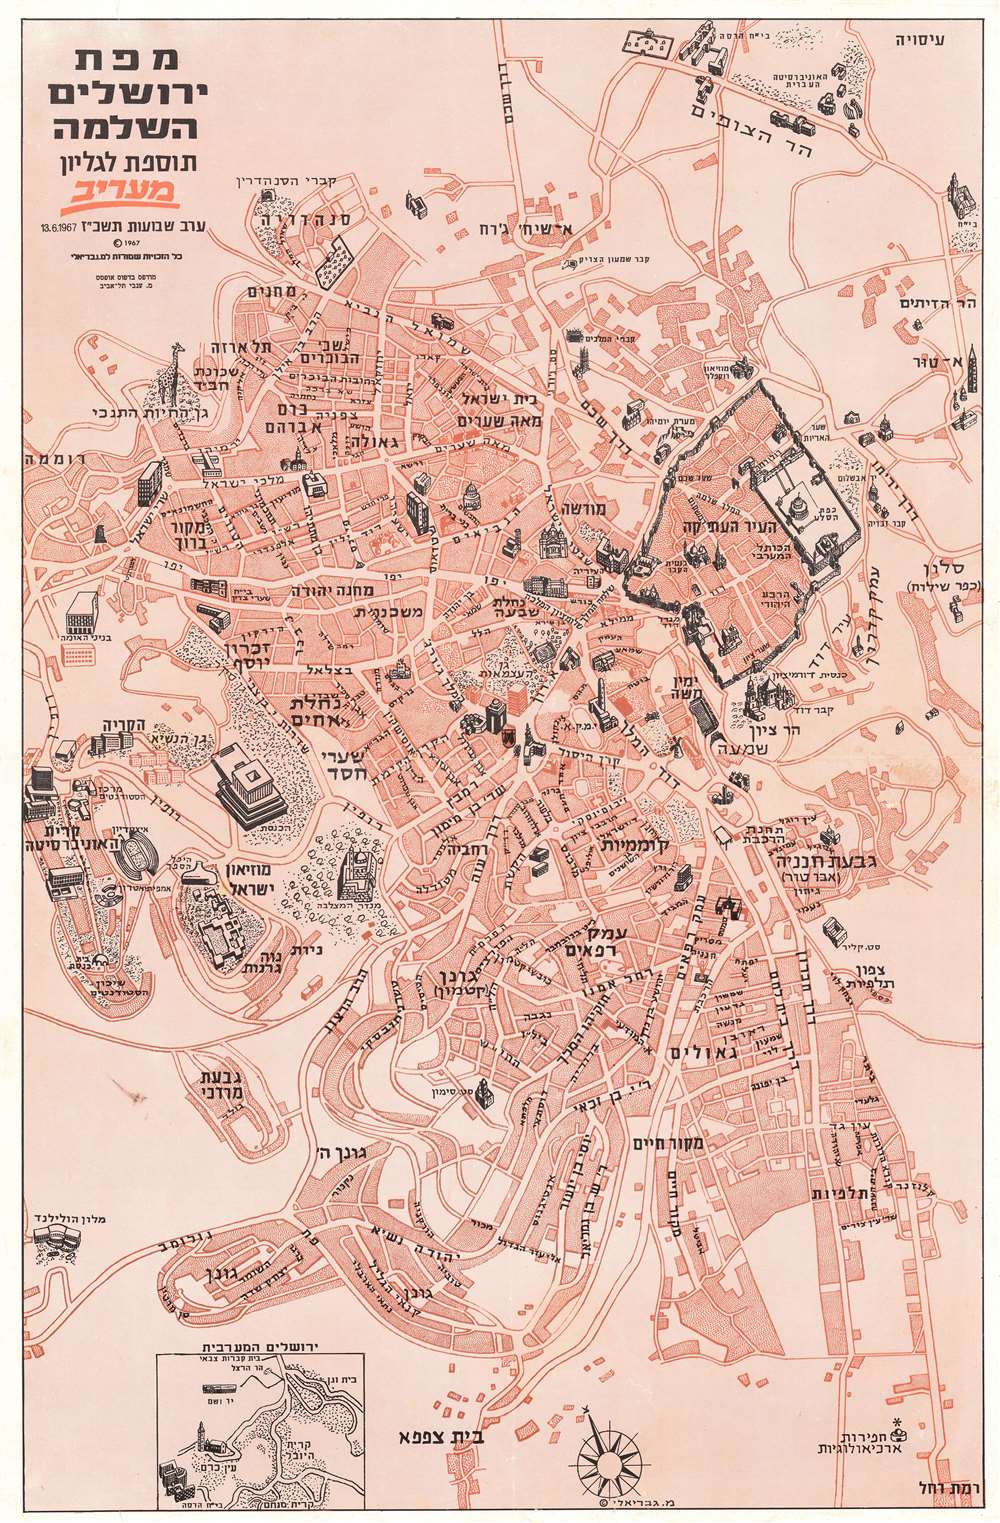 A Complete Map of Jerusalem. / מפת ירושלים השלמה - Main View